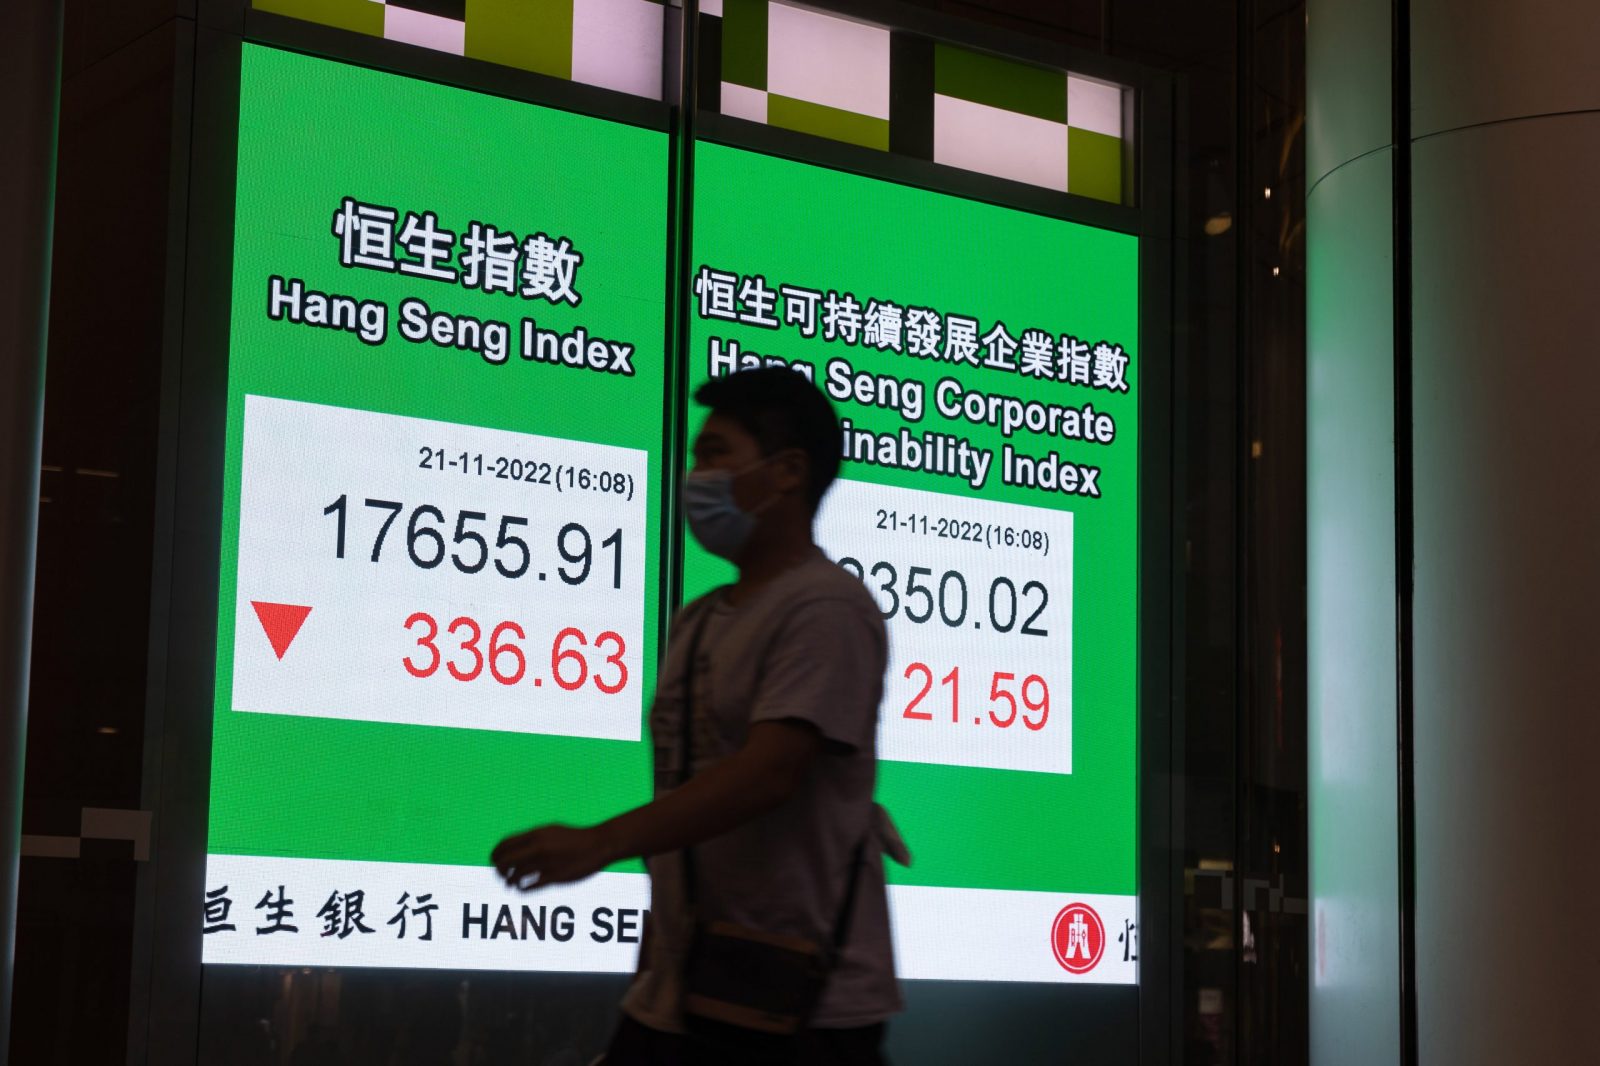 epa10317390 A man walks past an electronic billboard showing the Hang Seng Index closing figure in Hong Kong, China, 21 November 2022. The index dropped 1.9 at the end of trading day, the biggest setback in two weeks.  EPA/JEROME FAVRE